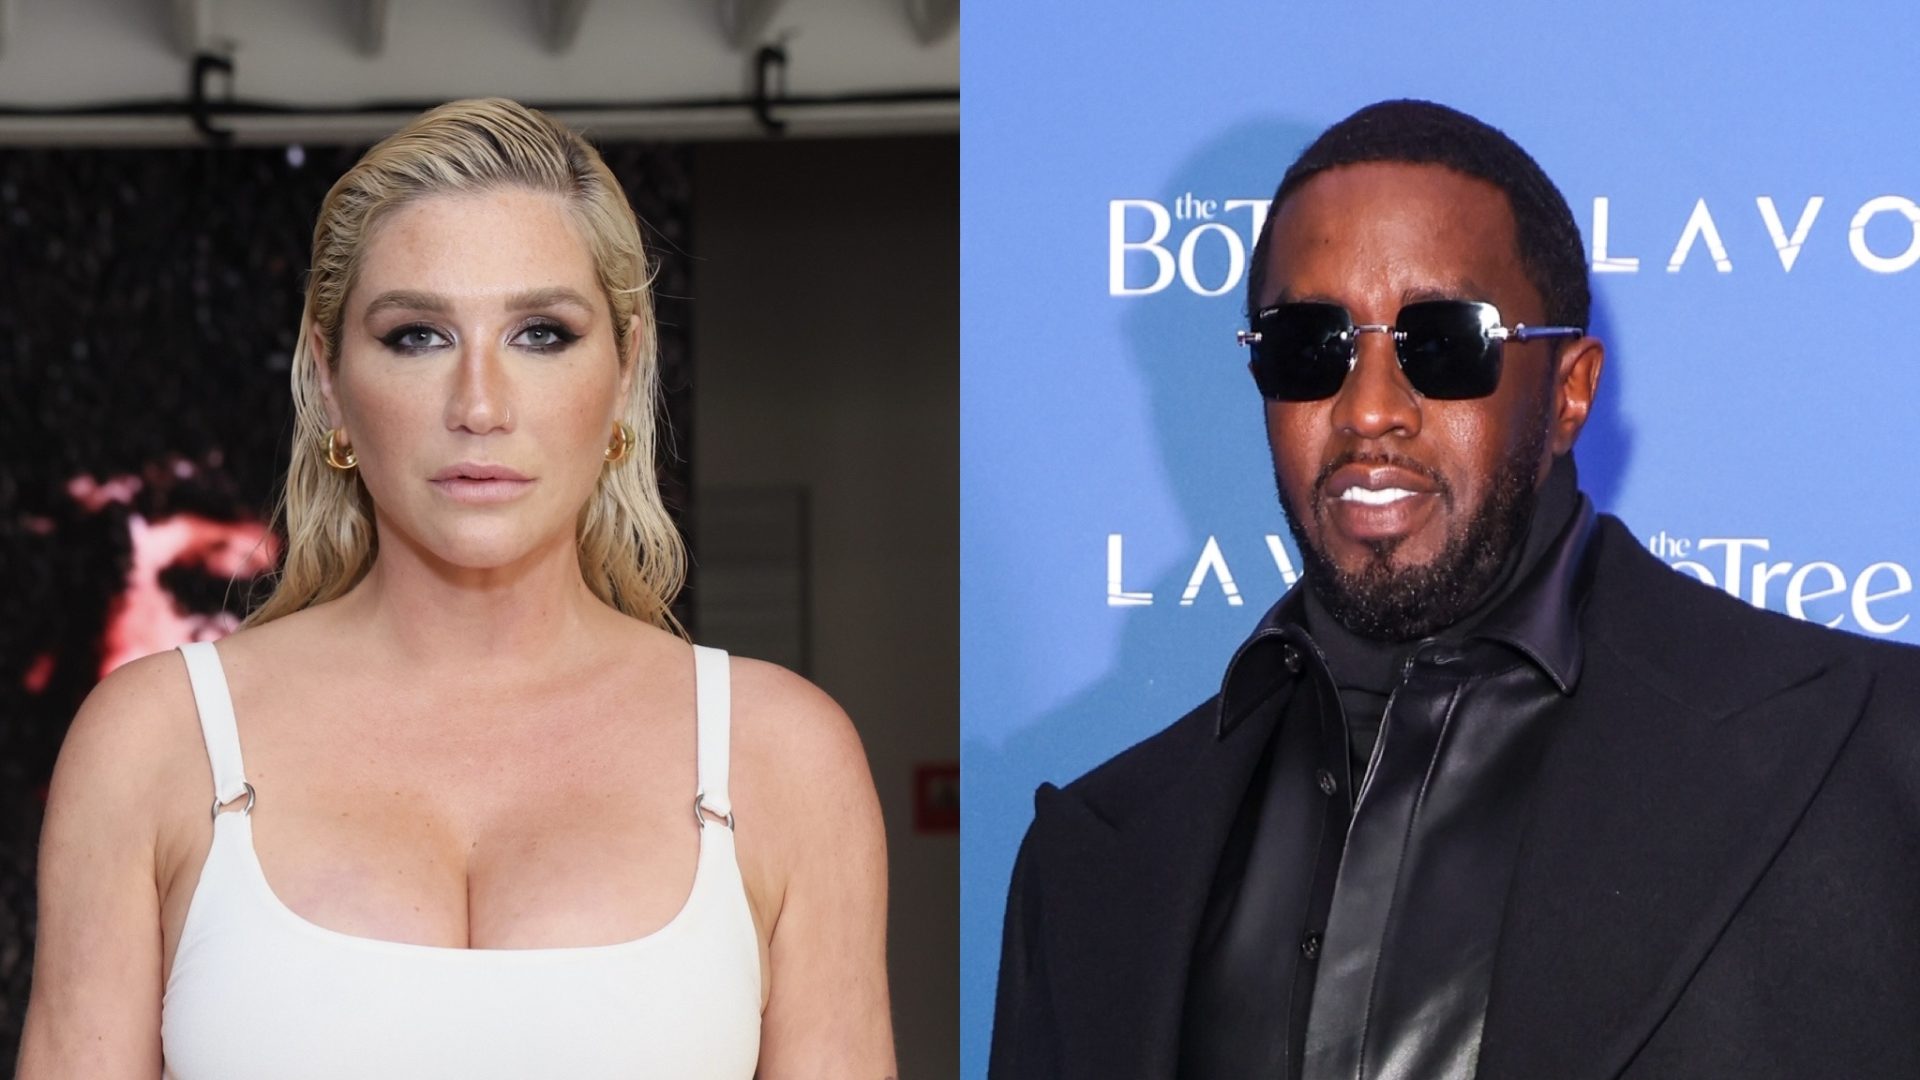 Oop! Kesha Goes Viral After Changing The Lyrics In Her Song 'TiK ToK' To Say THIS About Diddy (WATCH)